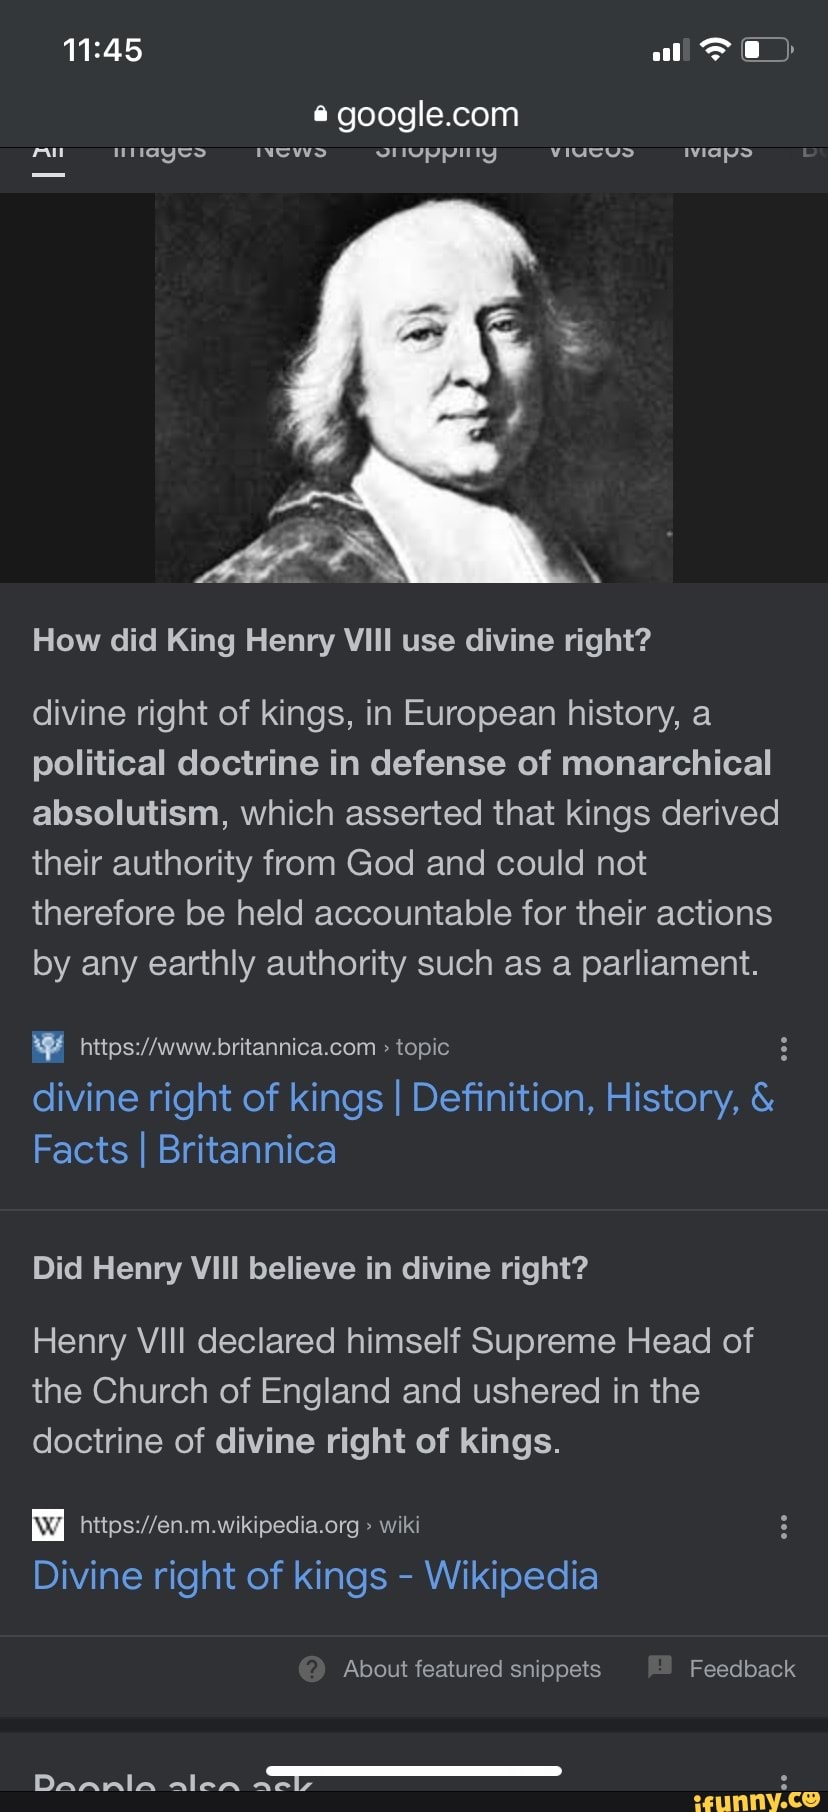 Divine right of kings - Wikipedia